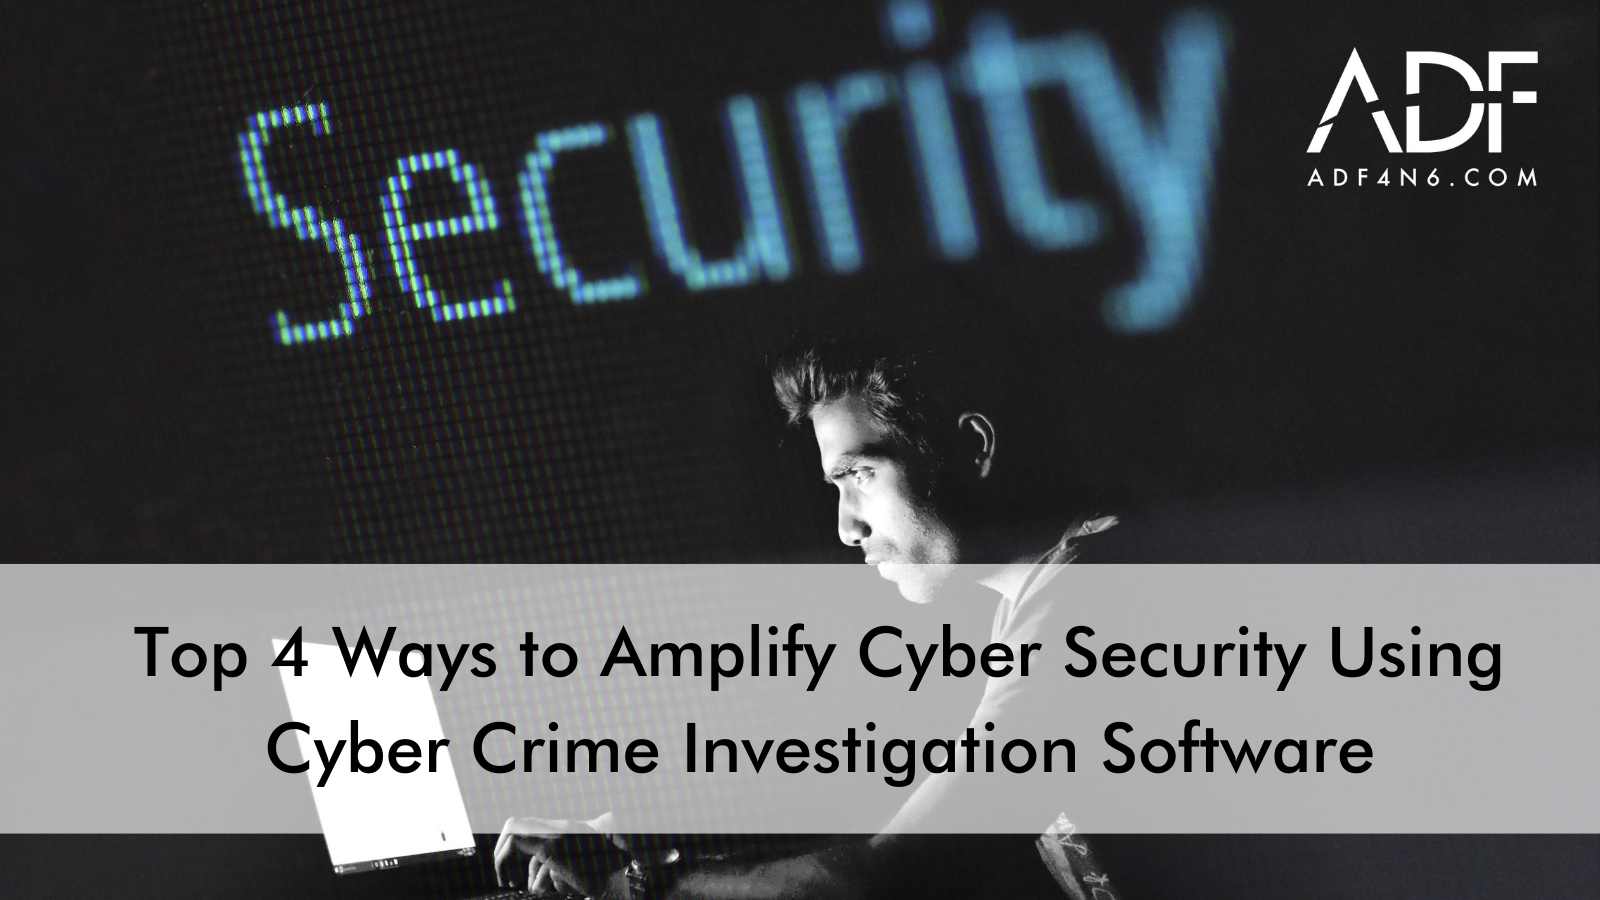 Top 4 Ways to Amplify Cyber Security with Investigation Software